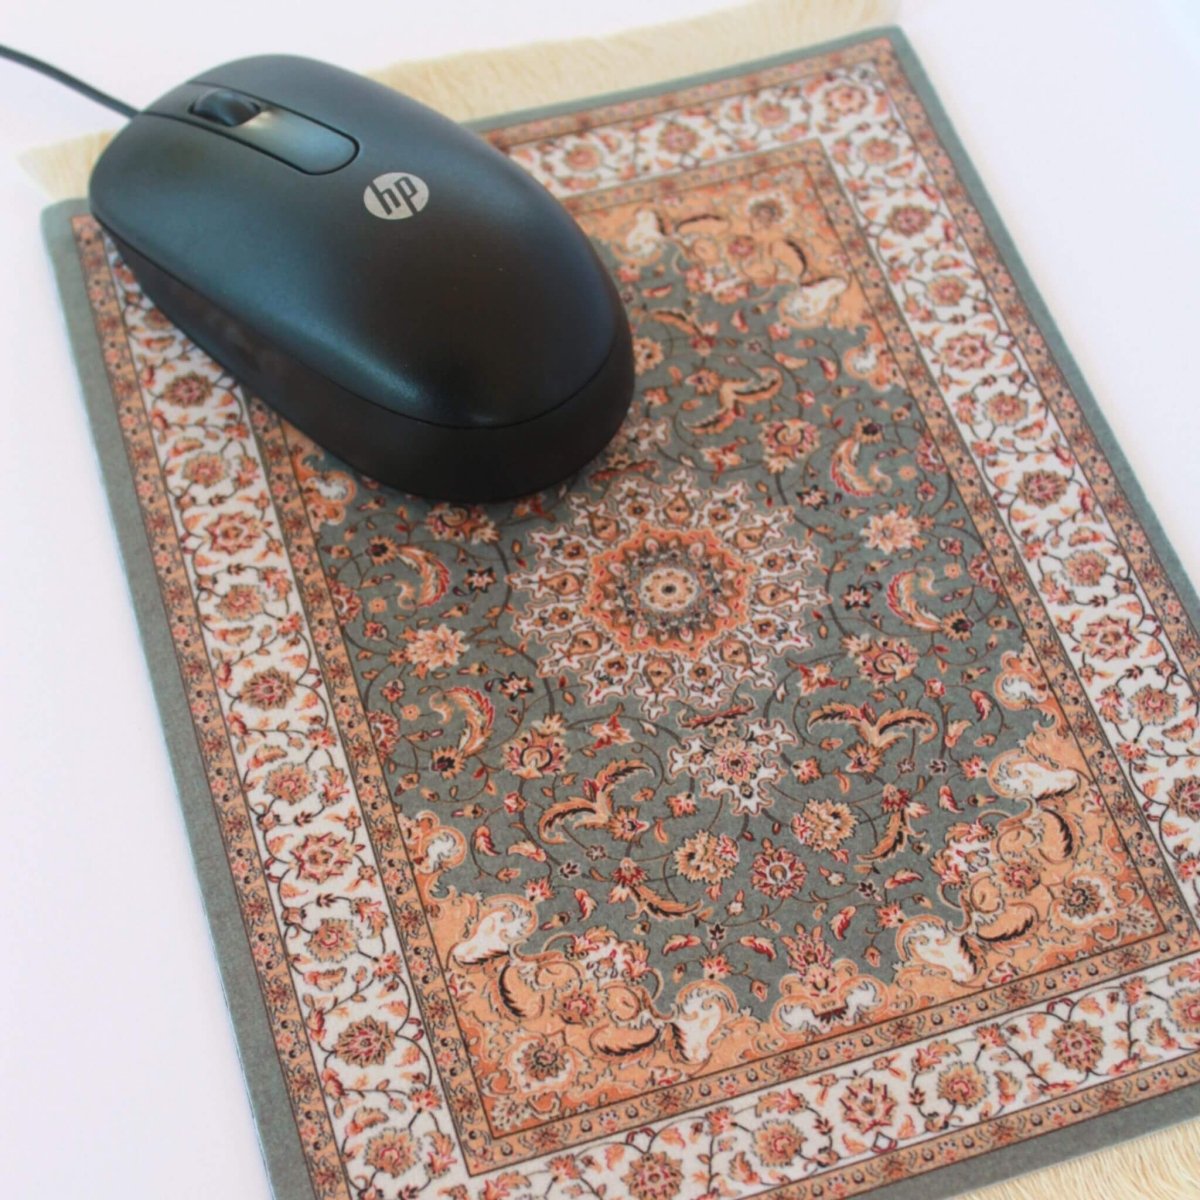 computer mouse on mouse pad that looks like a carpet rug